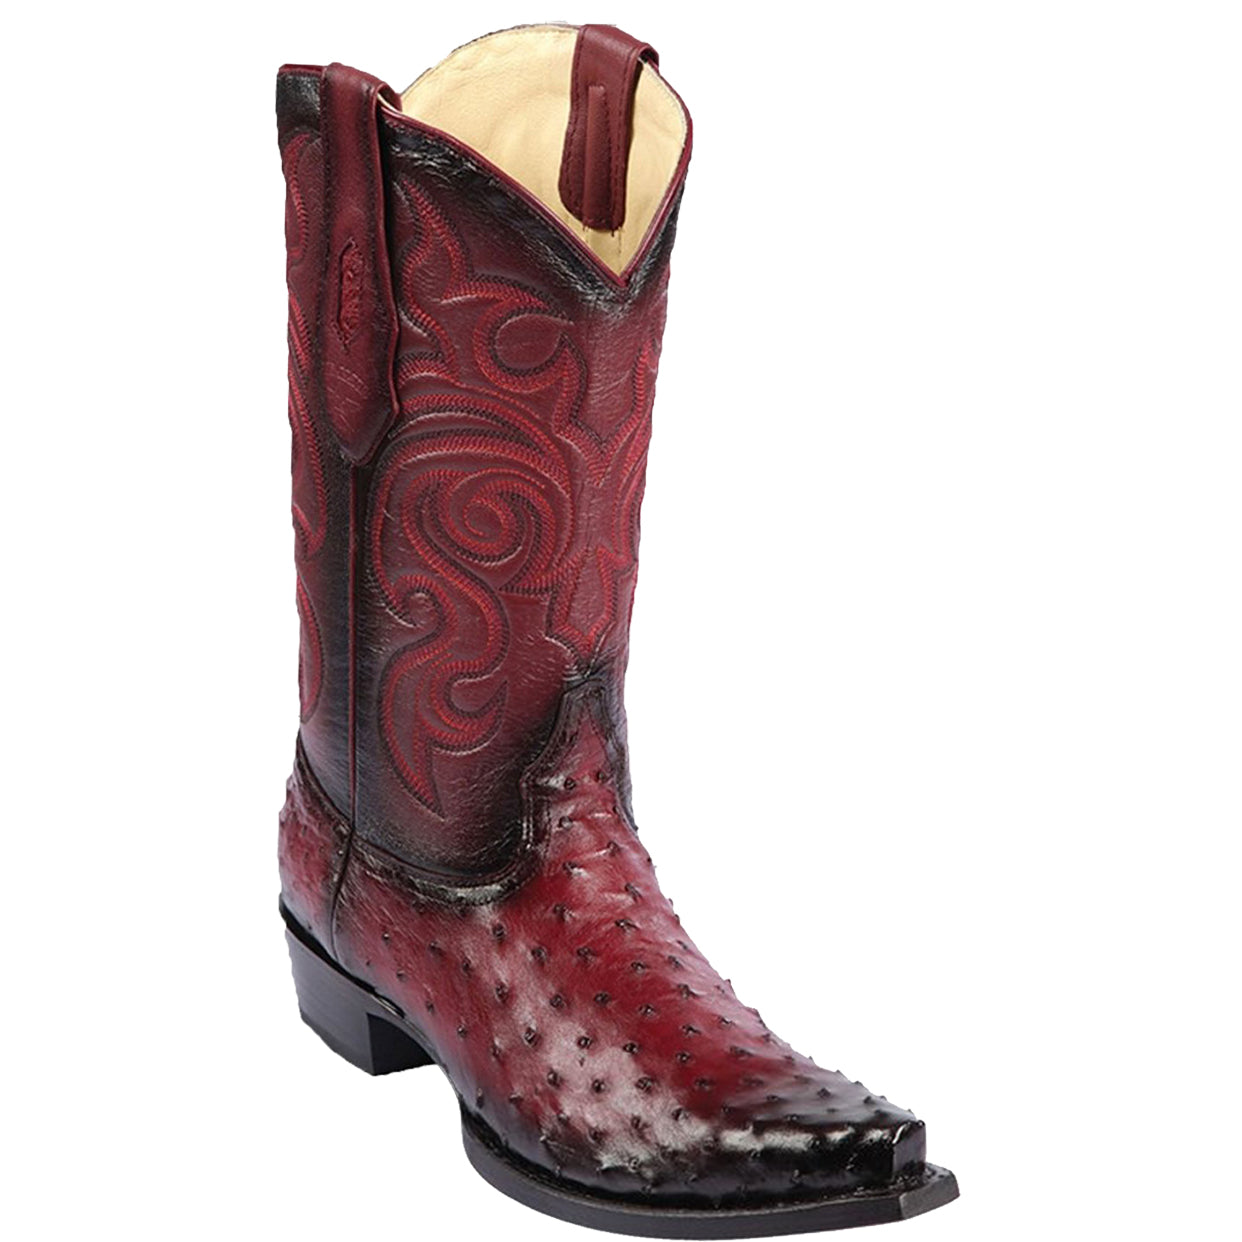 Mens Western Ostrich Leather Boots - Los Altos Boots